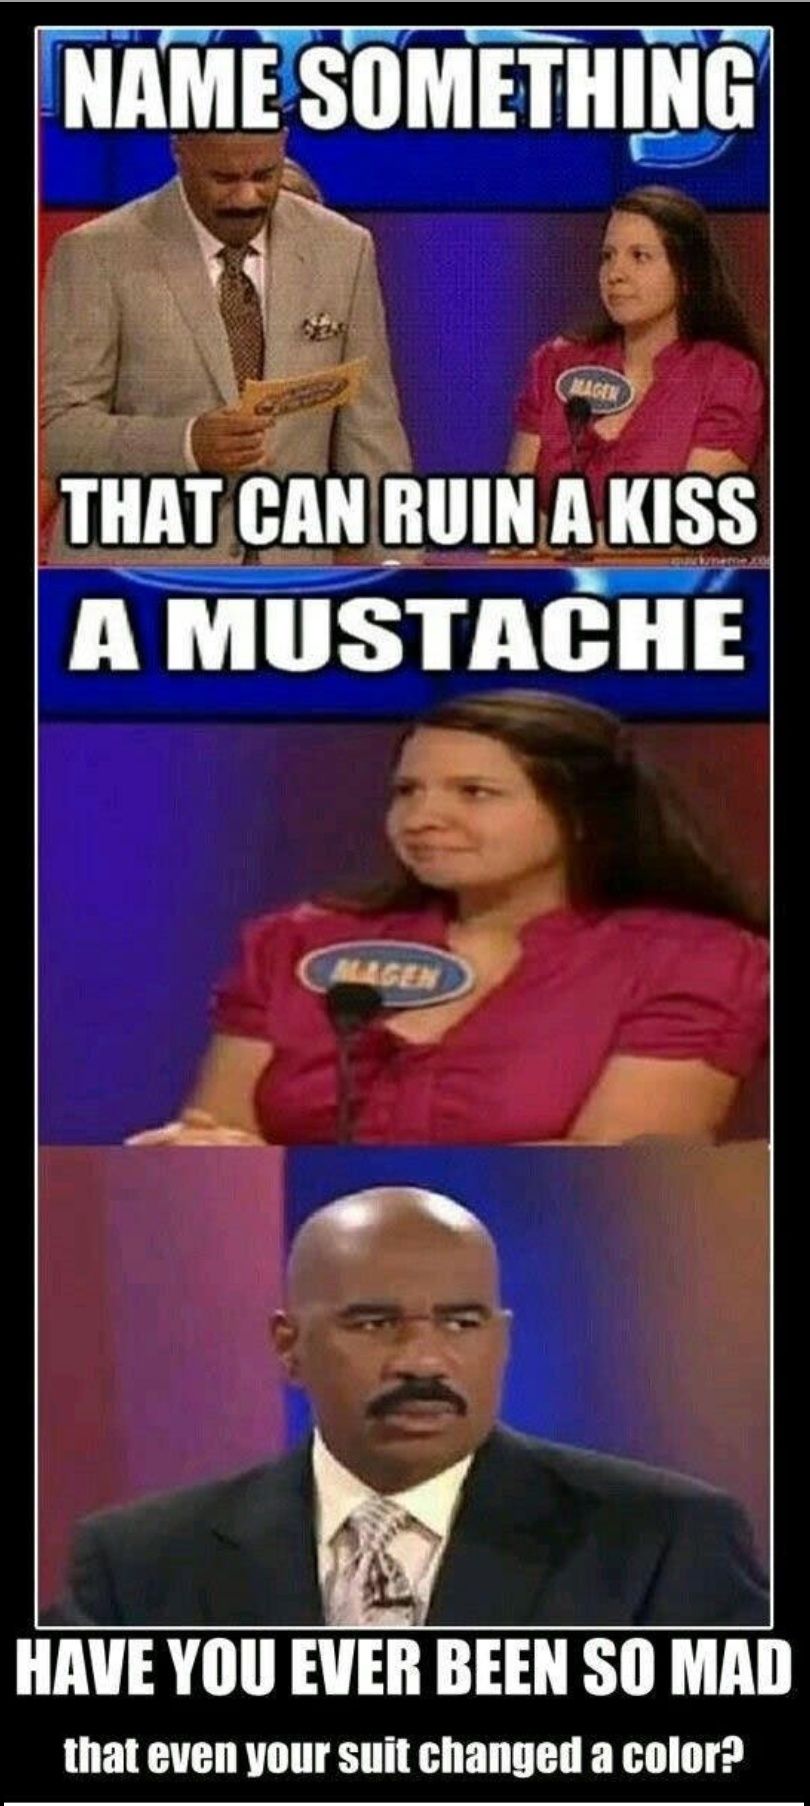 Mustache can ruin Your kiss!